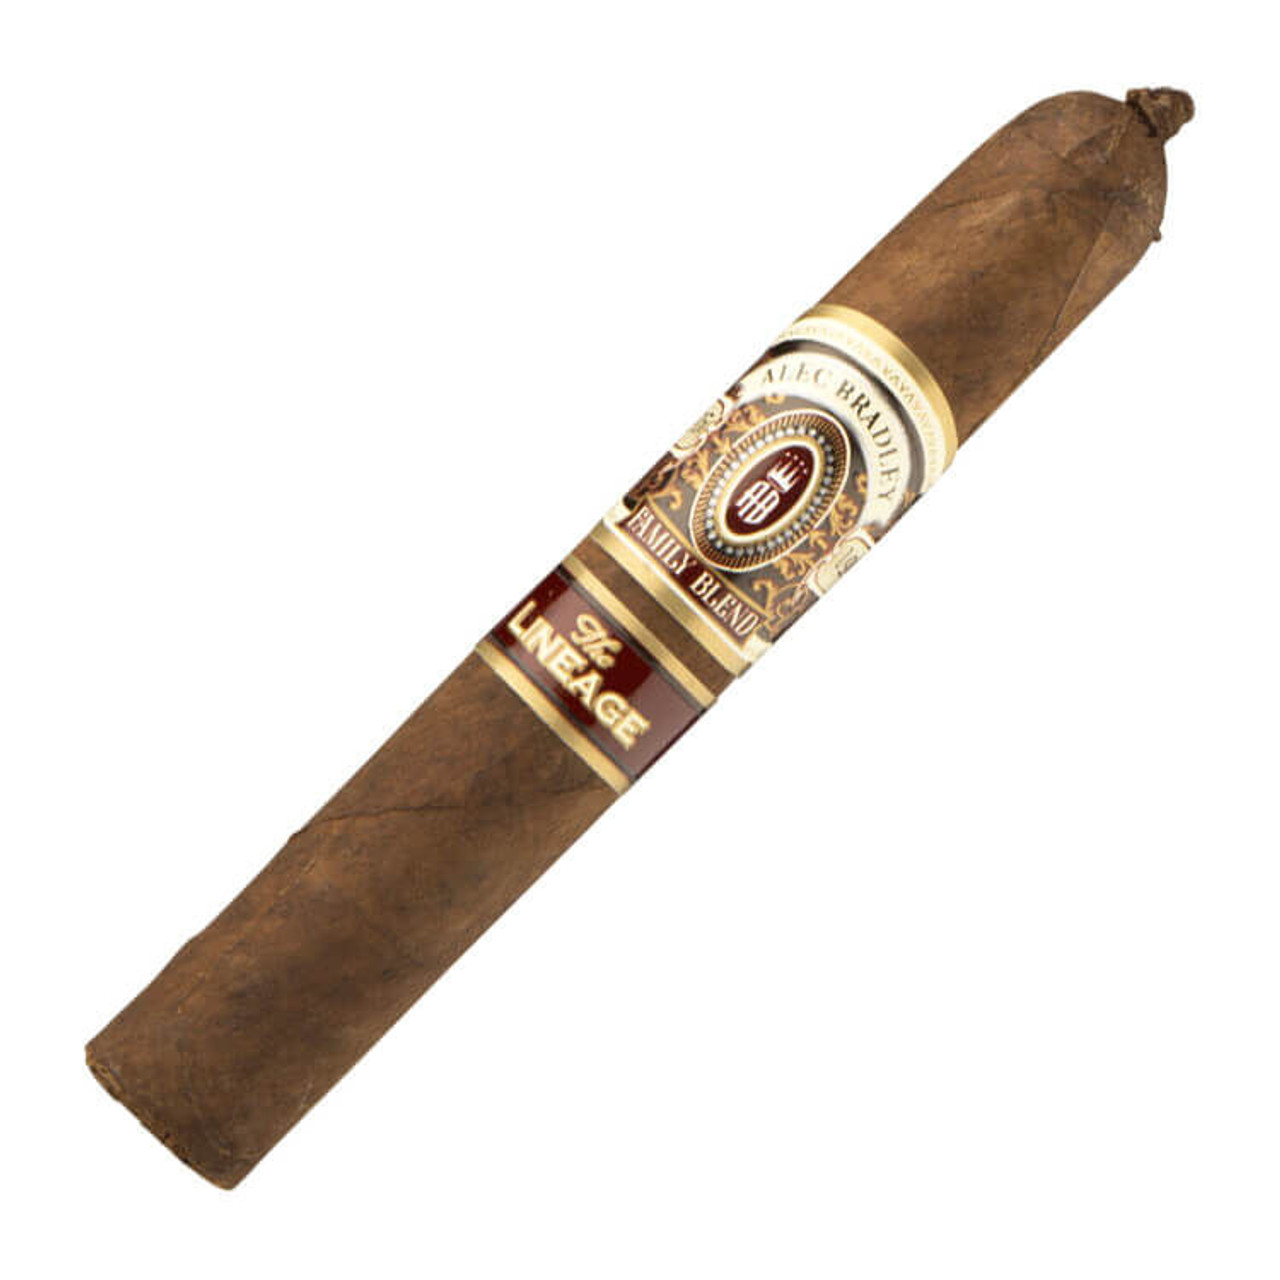 Alec Bradley Family Blend The Lineage Robusto Cigars - 5.25 x 52 Single